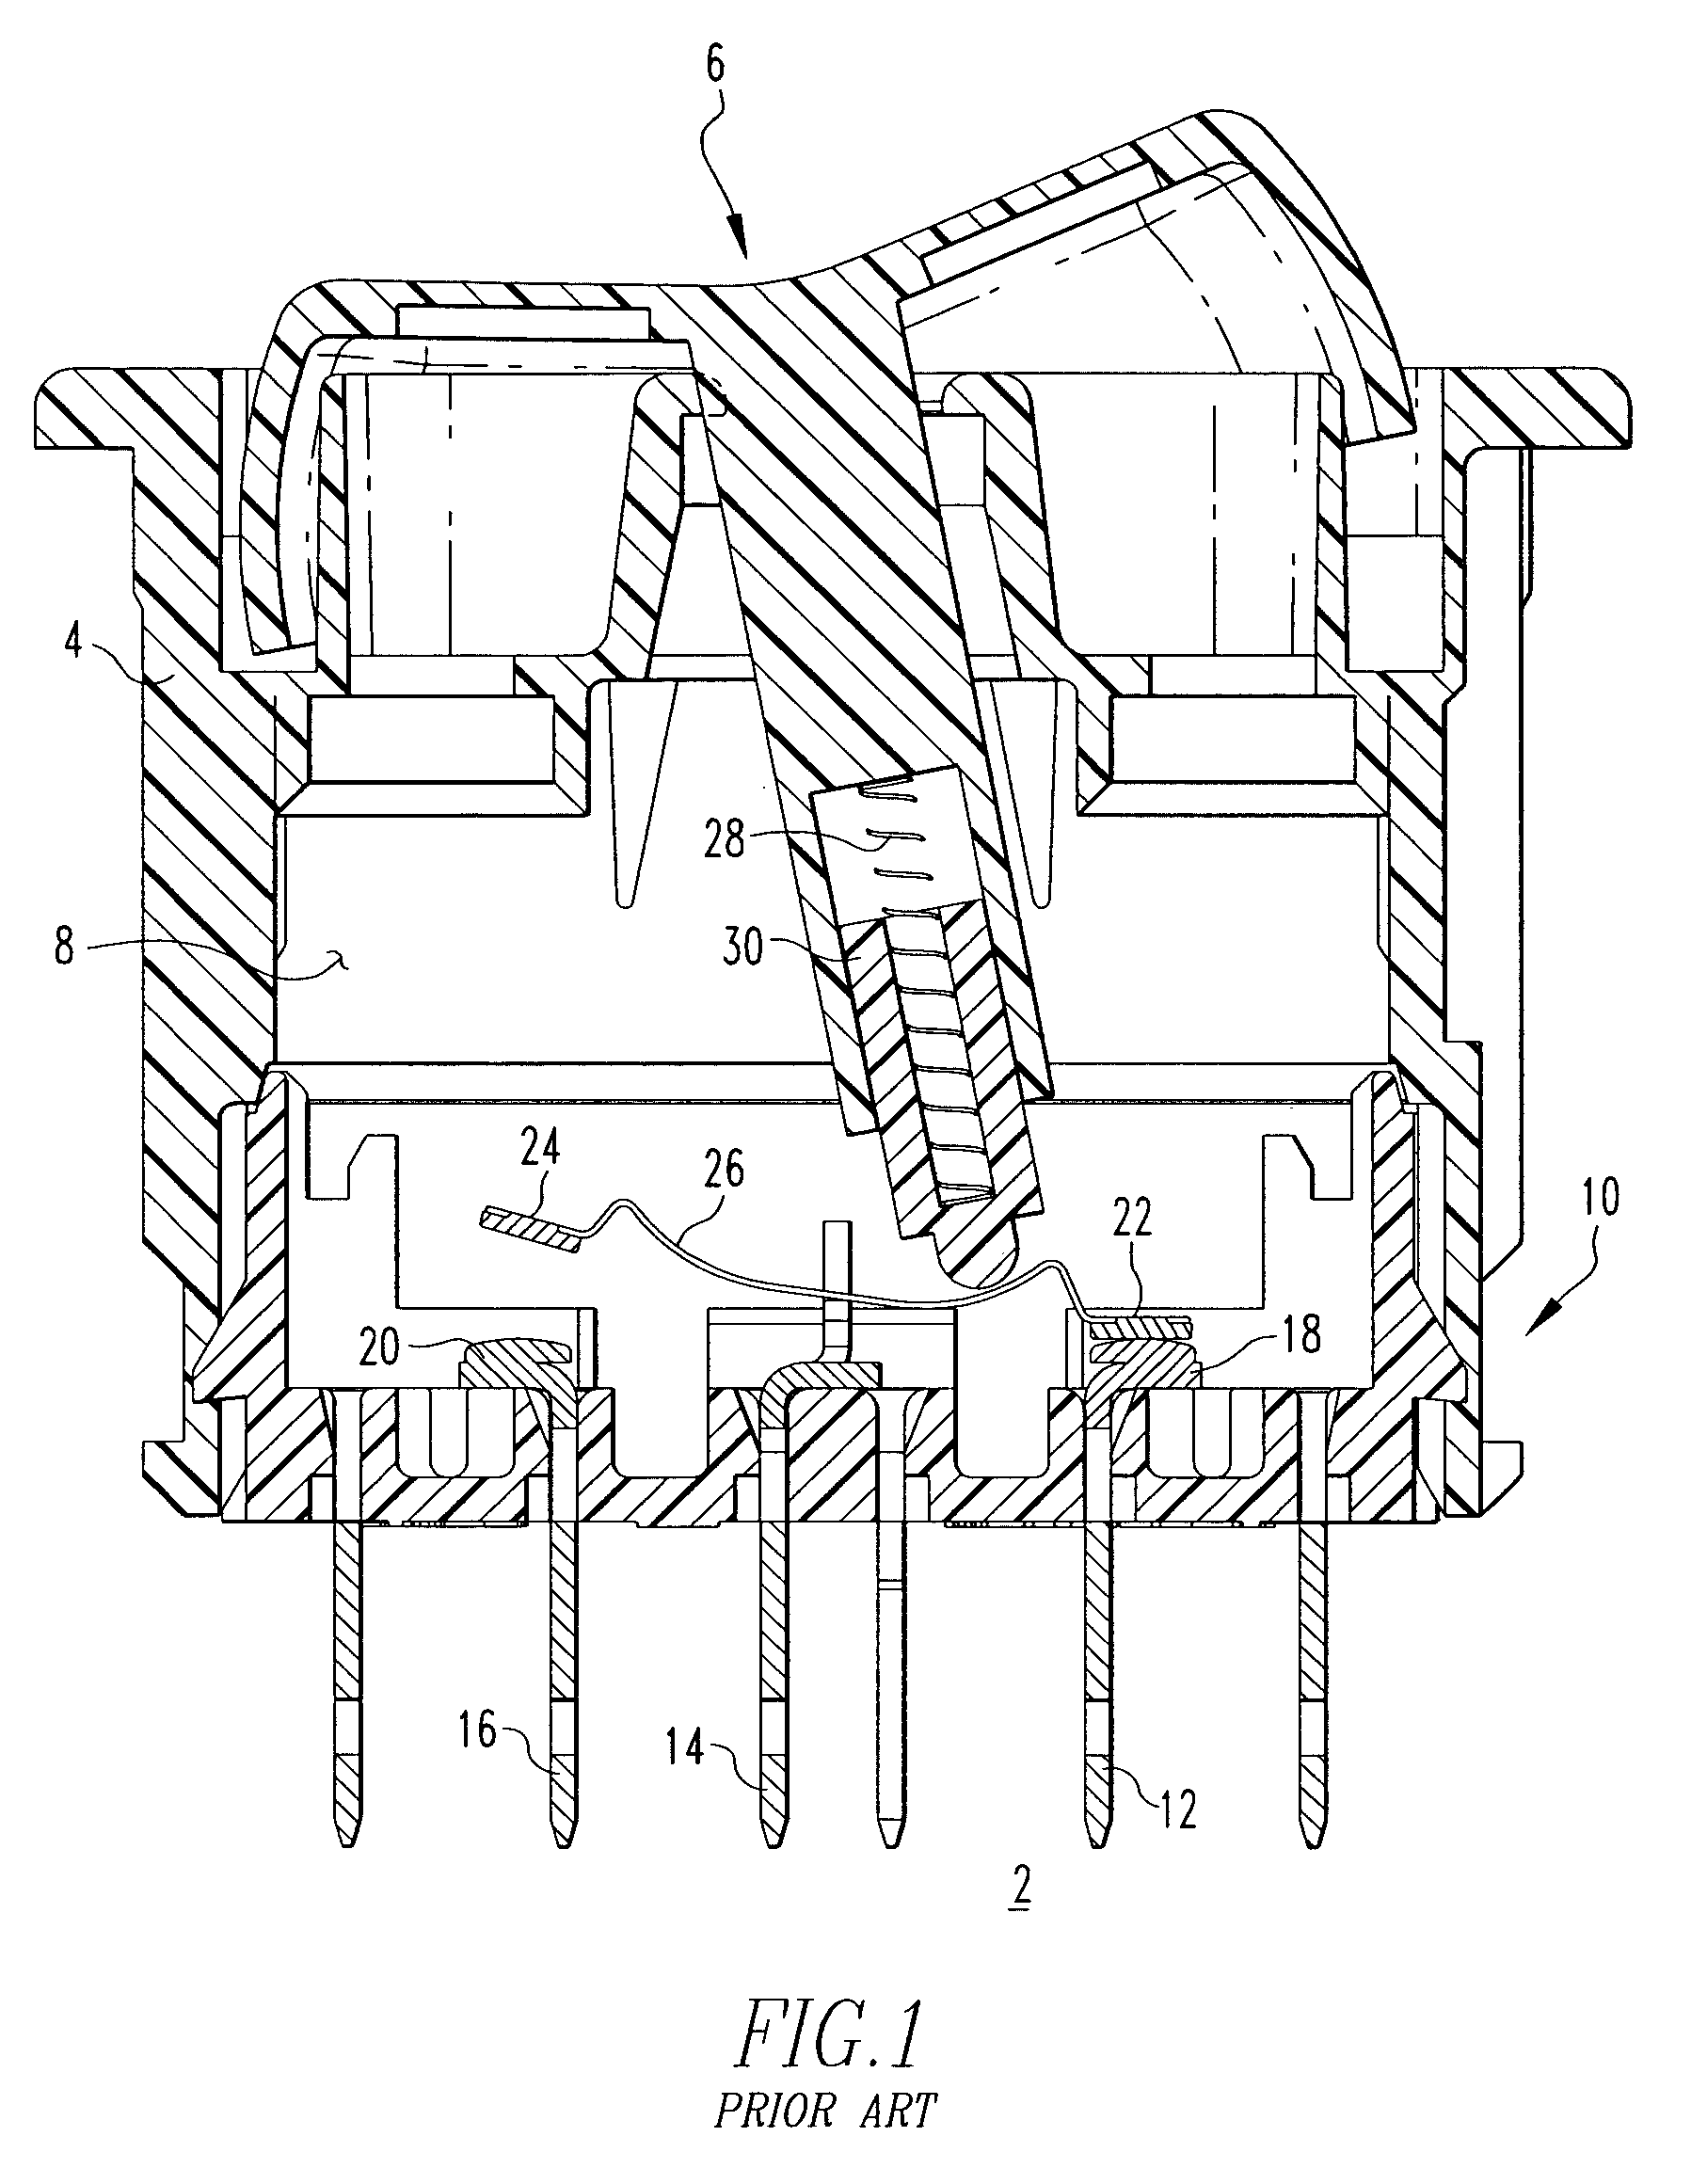 Self-contained actuator subassembly for a rocker switch and rocker switch employing the same